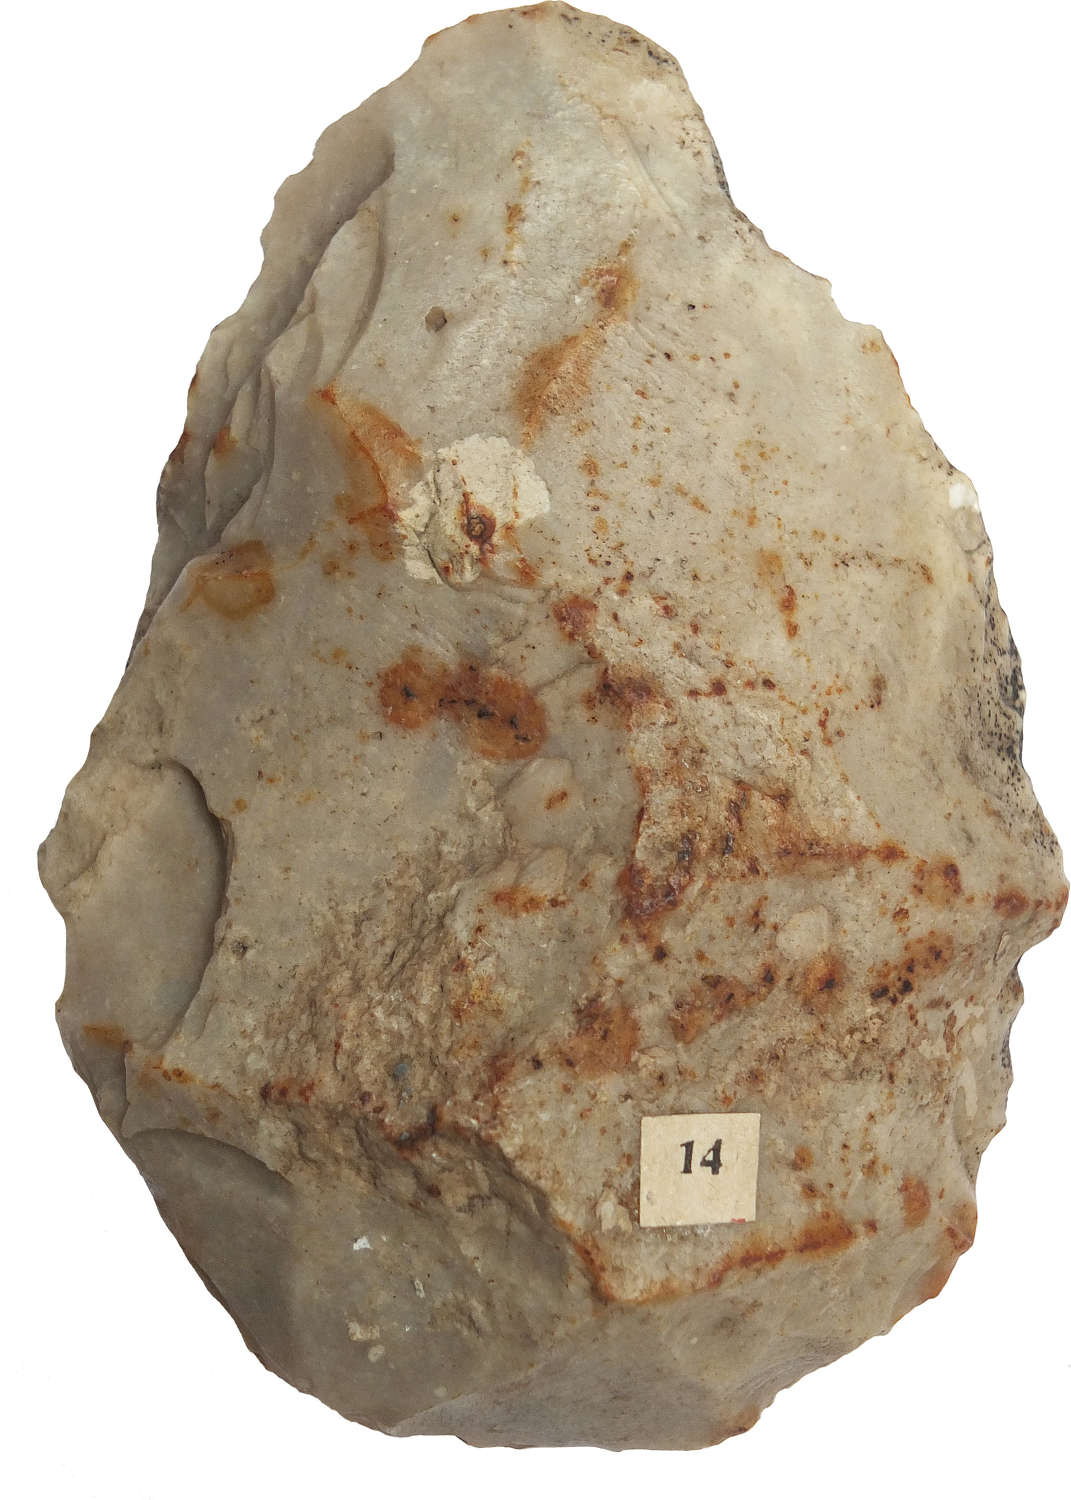 A Palaeolithic flint handaxe believed to have been found in France